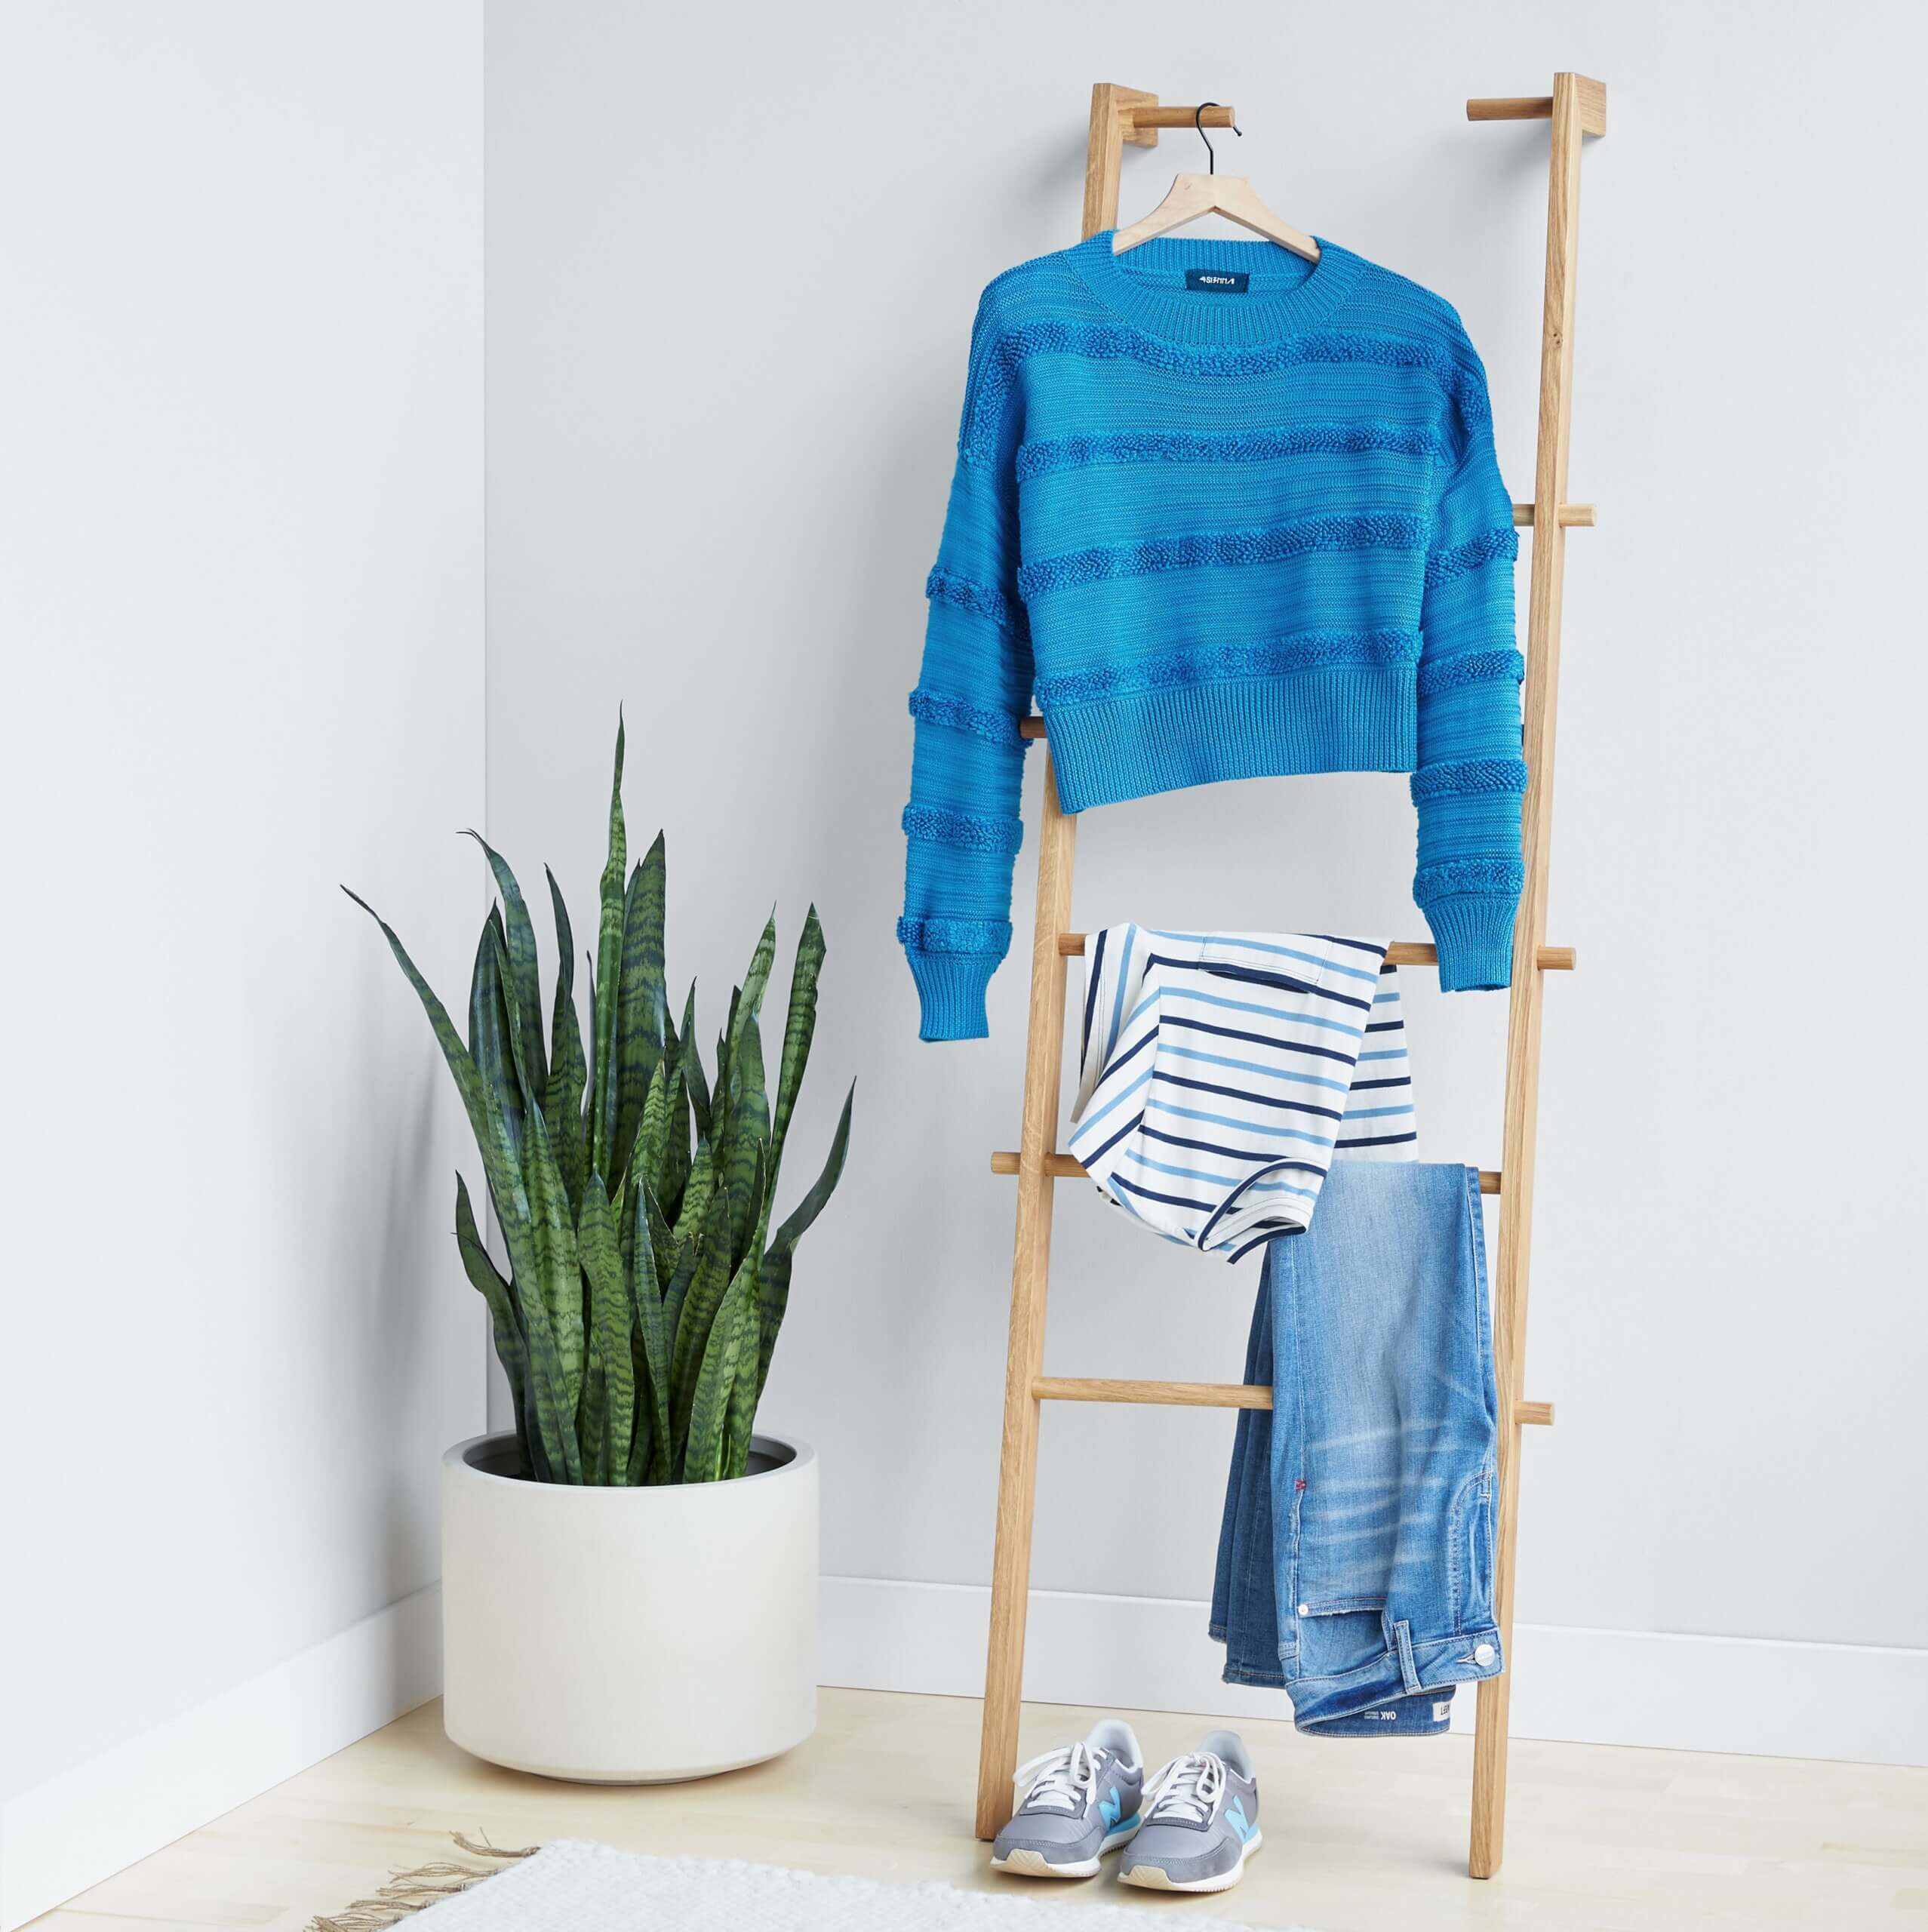 Stitch Fix women's outfit featuring blue textured pullover sweater, white and blue striped shirt and blue jeans hanging on wooden ladder, next to blue sneakers. 